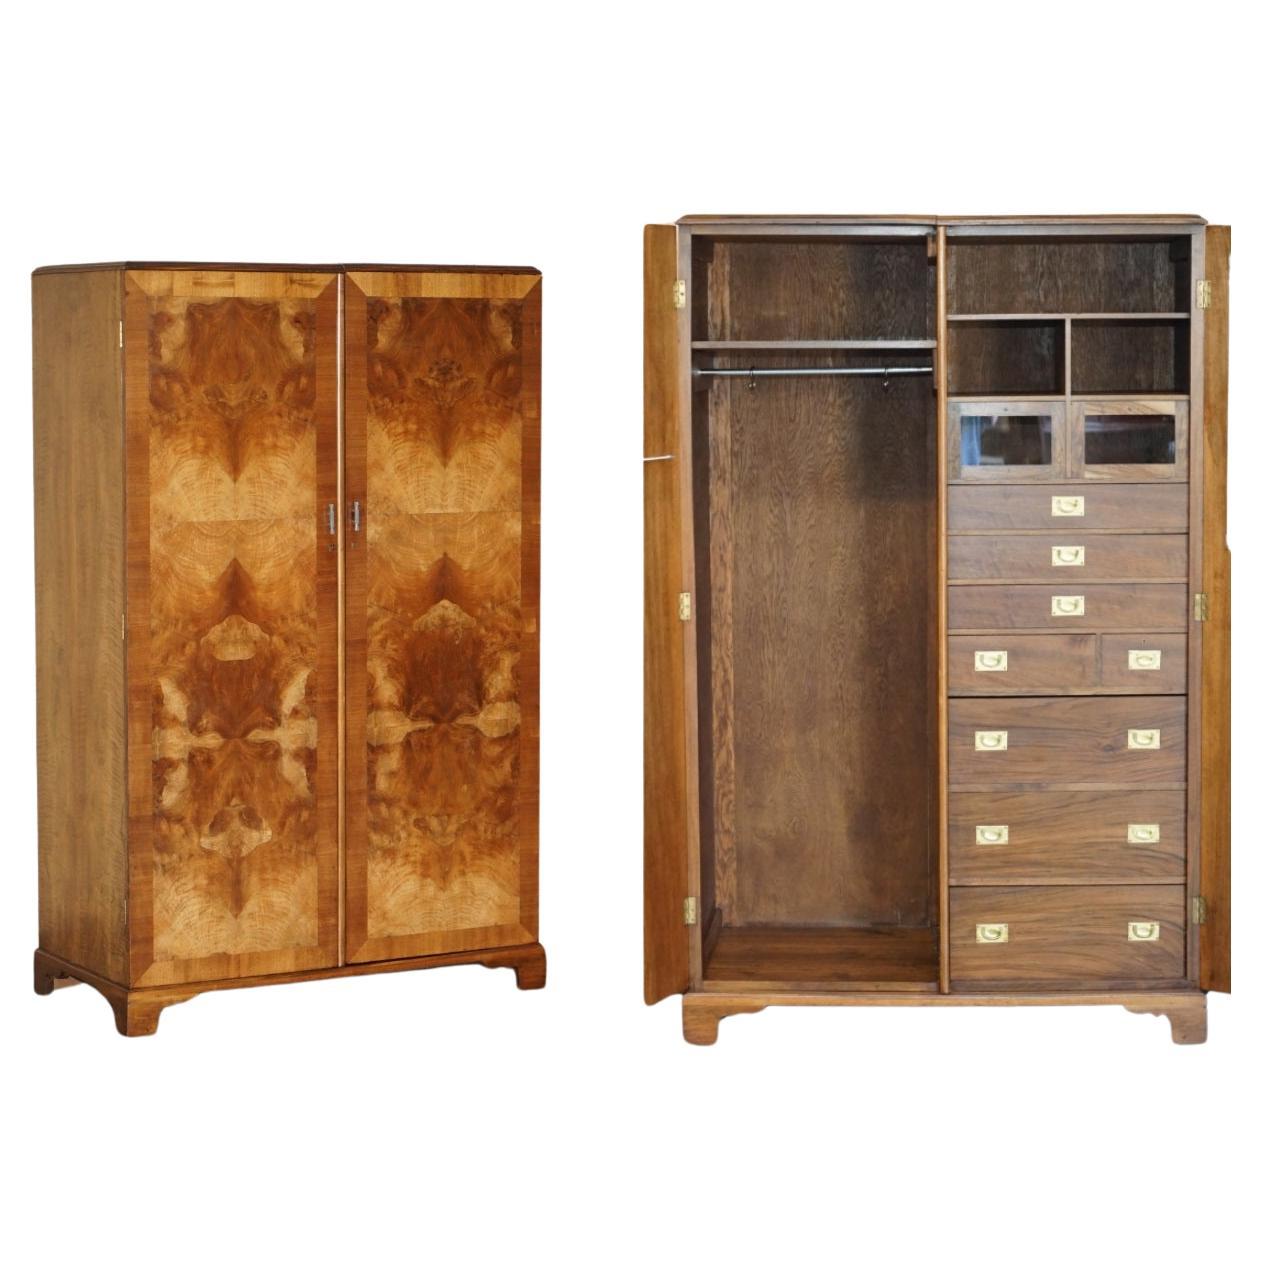 ANTIQUE BURR WALNUT WARDROBE WiTH MILITARY CAMPAIGN CHEST OF DRAWERS BUILT IN For Sale